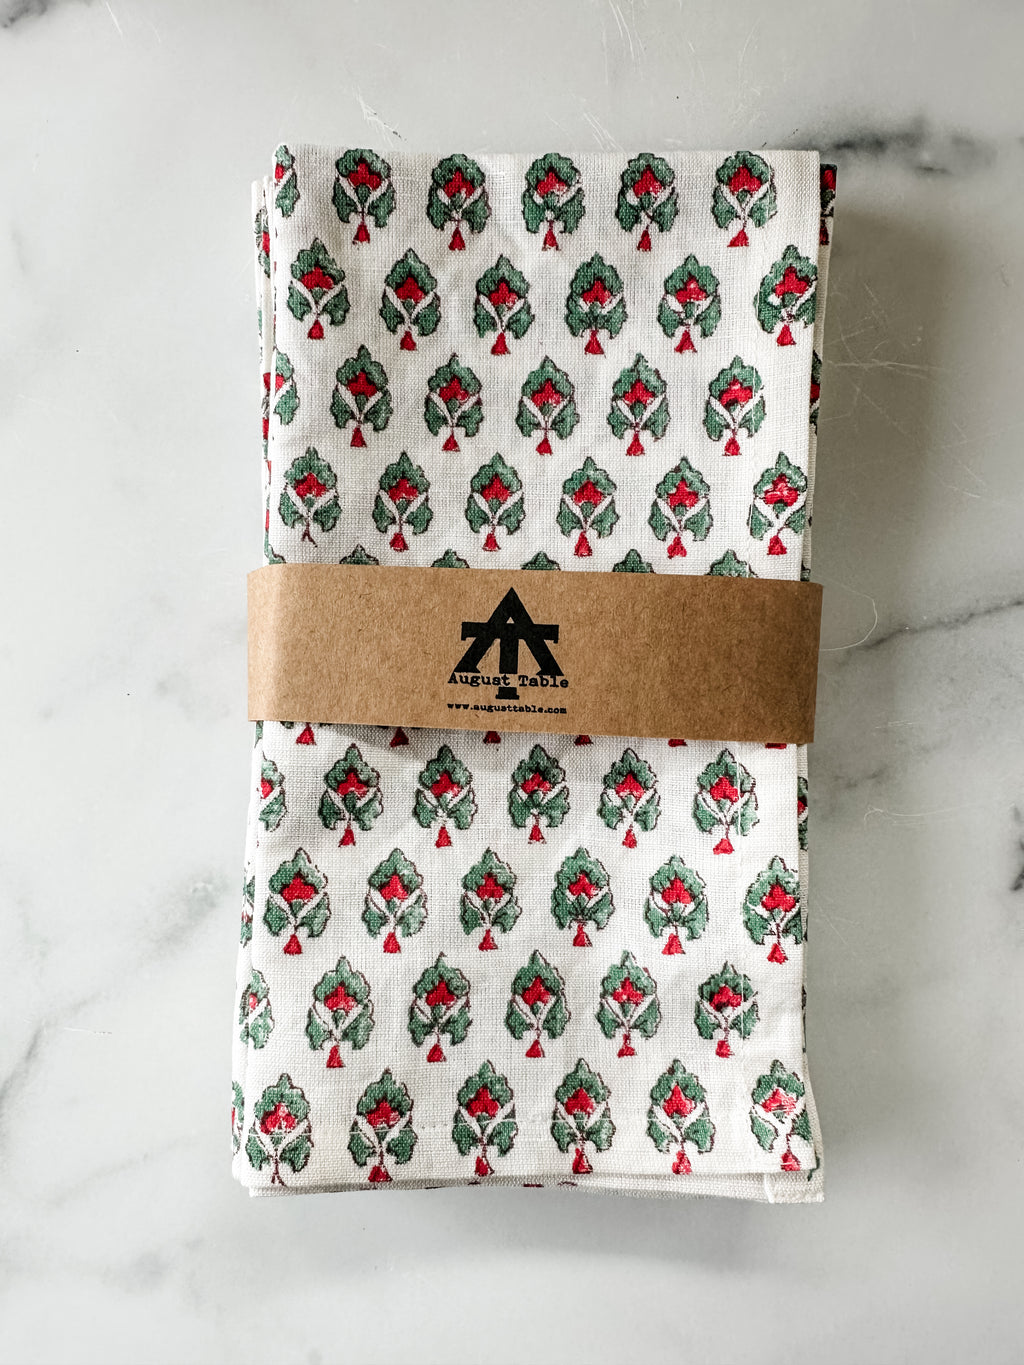 Trillium Napkins in Red and Green Cotton | Linen blend